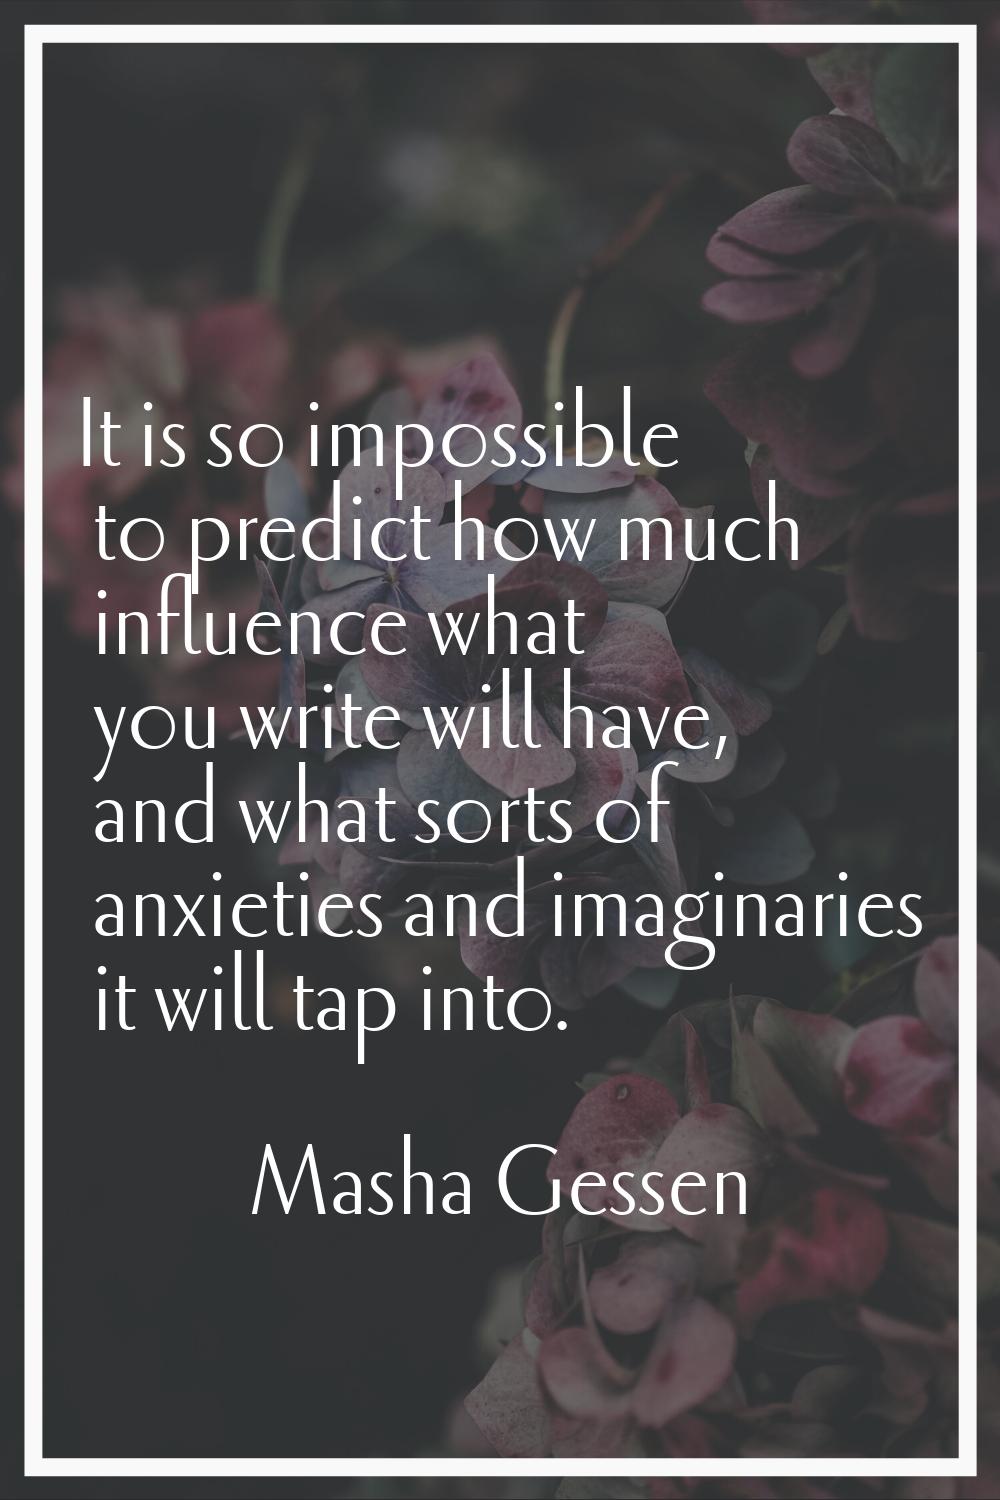 It is so impossible to predict how much influence what you write will have, and what sorts of anxie